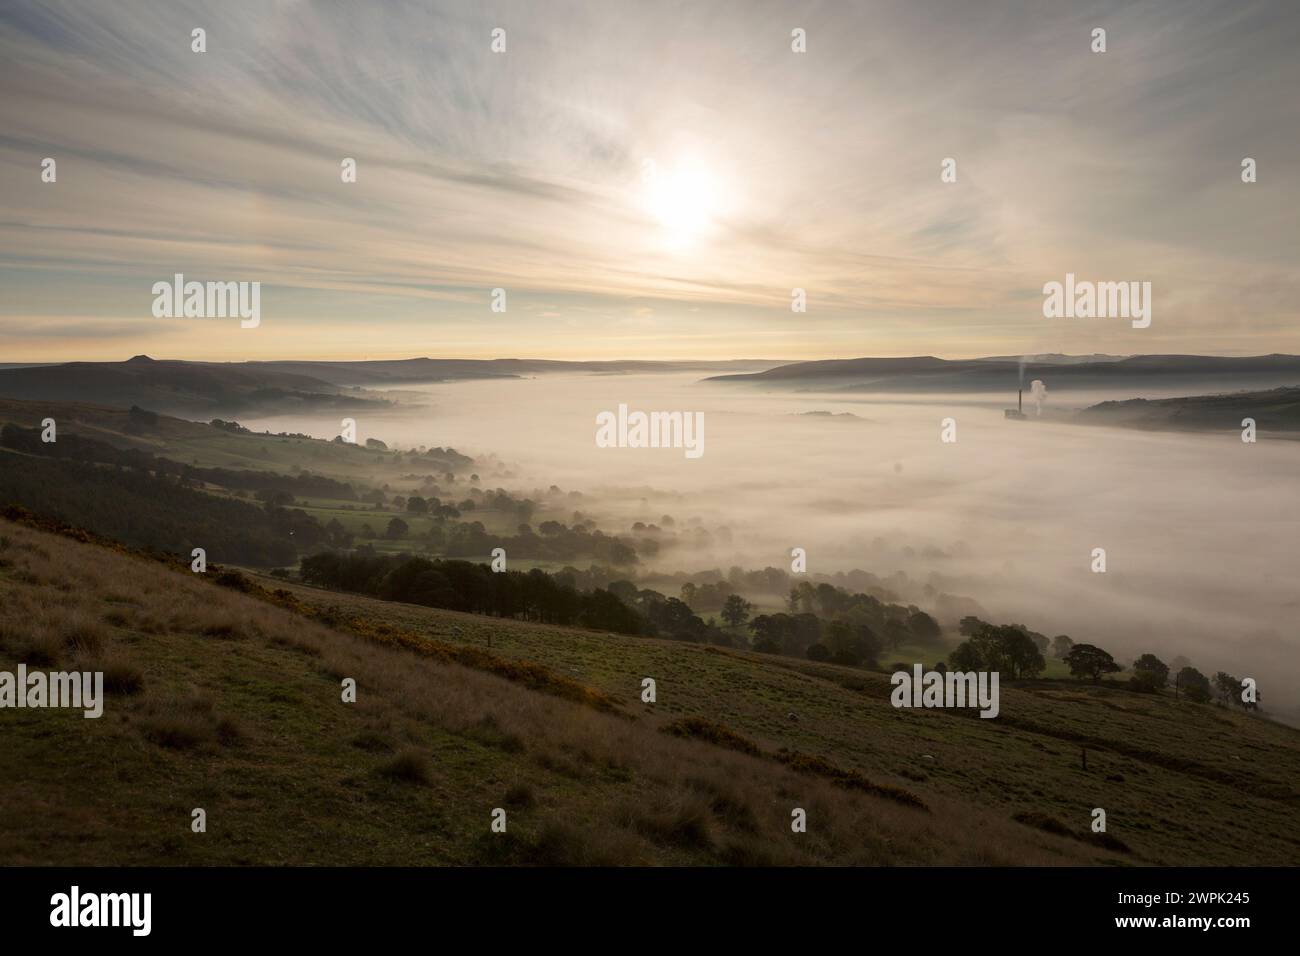 UK, Derbyshire, inversion / mist in the Hope Valley. Stock Photo